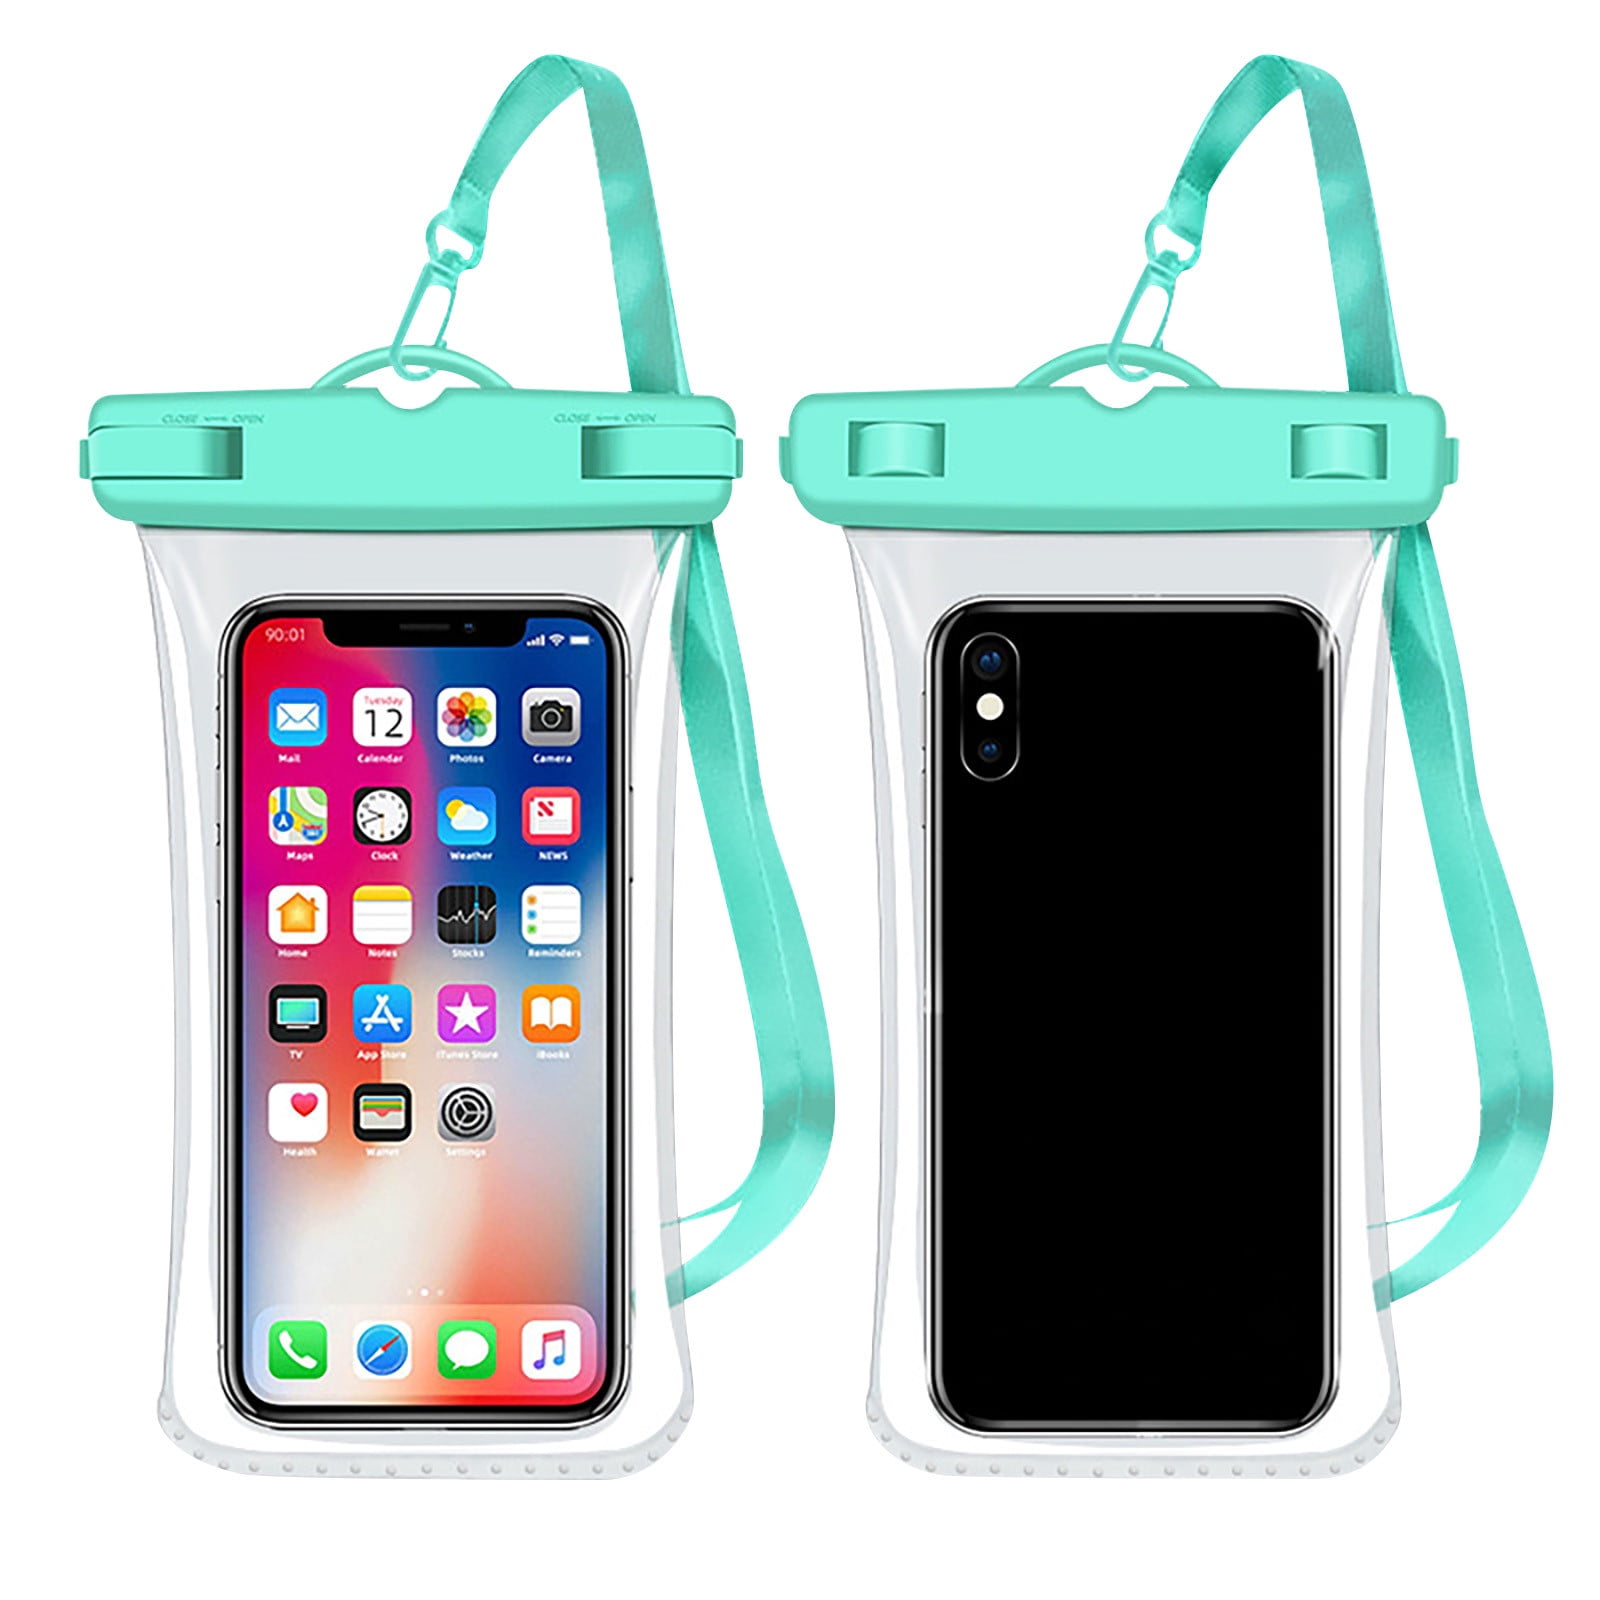 Floating Waterproof Phone Case Waterproof Pouch Cell Phone Dry Bag For Phone Walmart Canada 